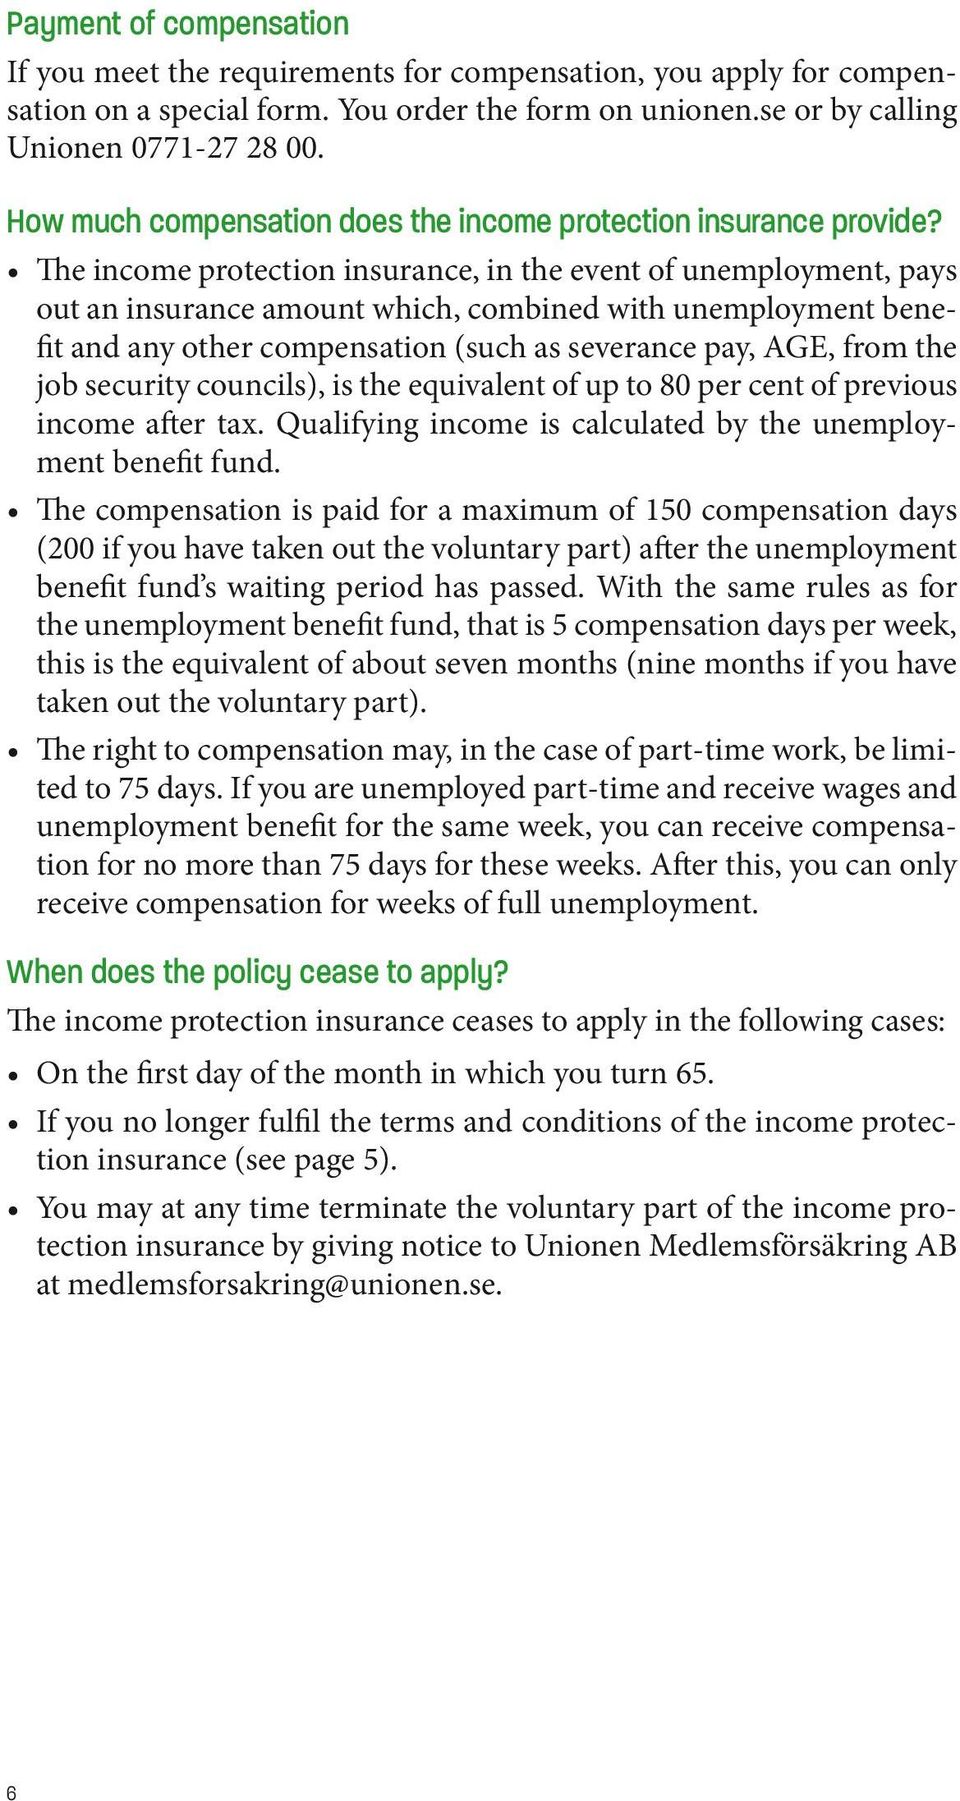 The income protection insurance, in the event of unemployment, pays out an insurance amount which, combined with unemployment benefit and any other compensation (such as severance pay, AGE, from the